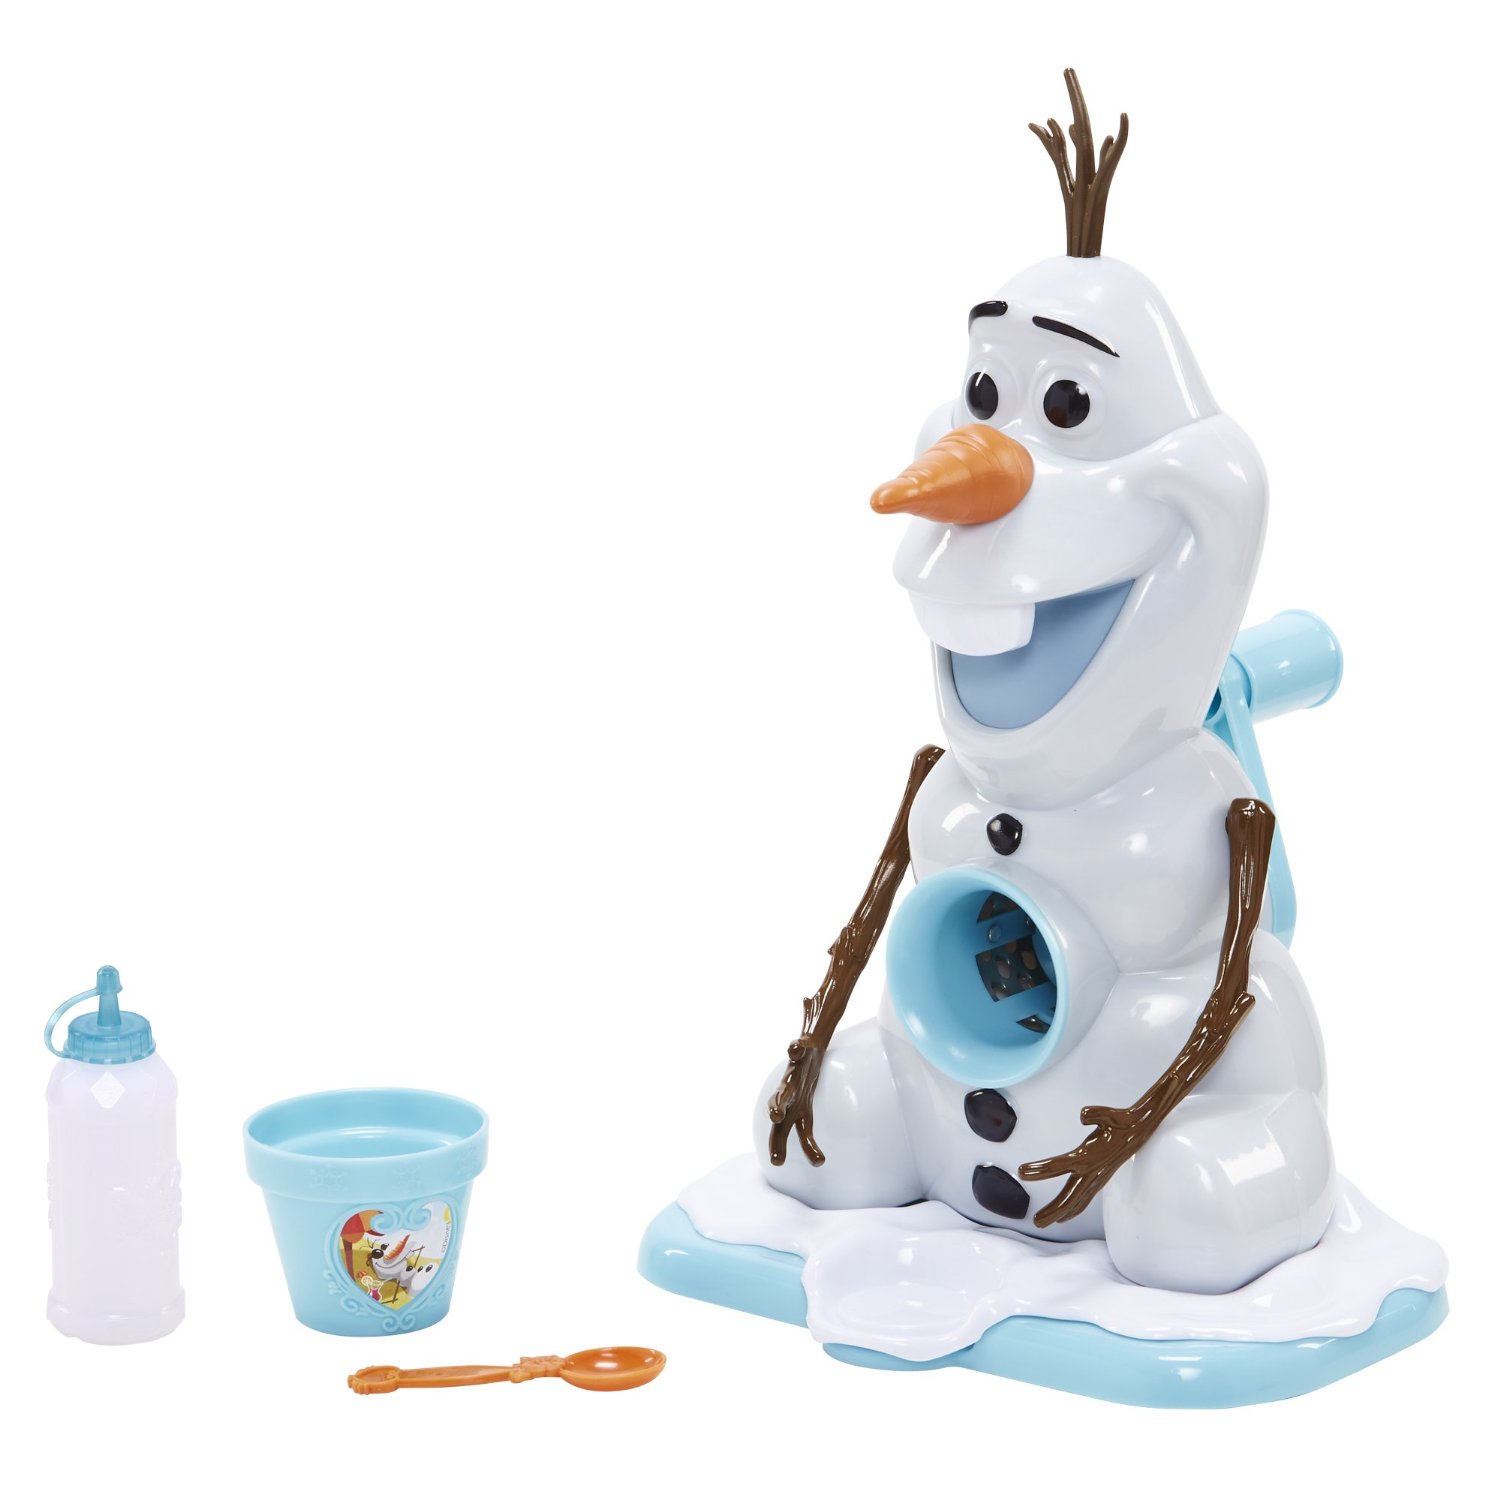 Disney Finds – Olaf snow-cone maker